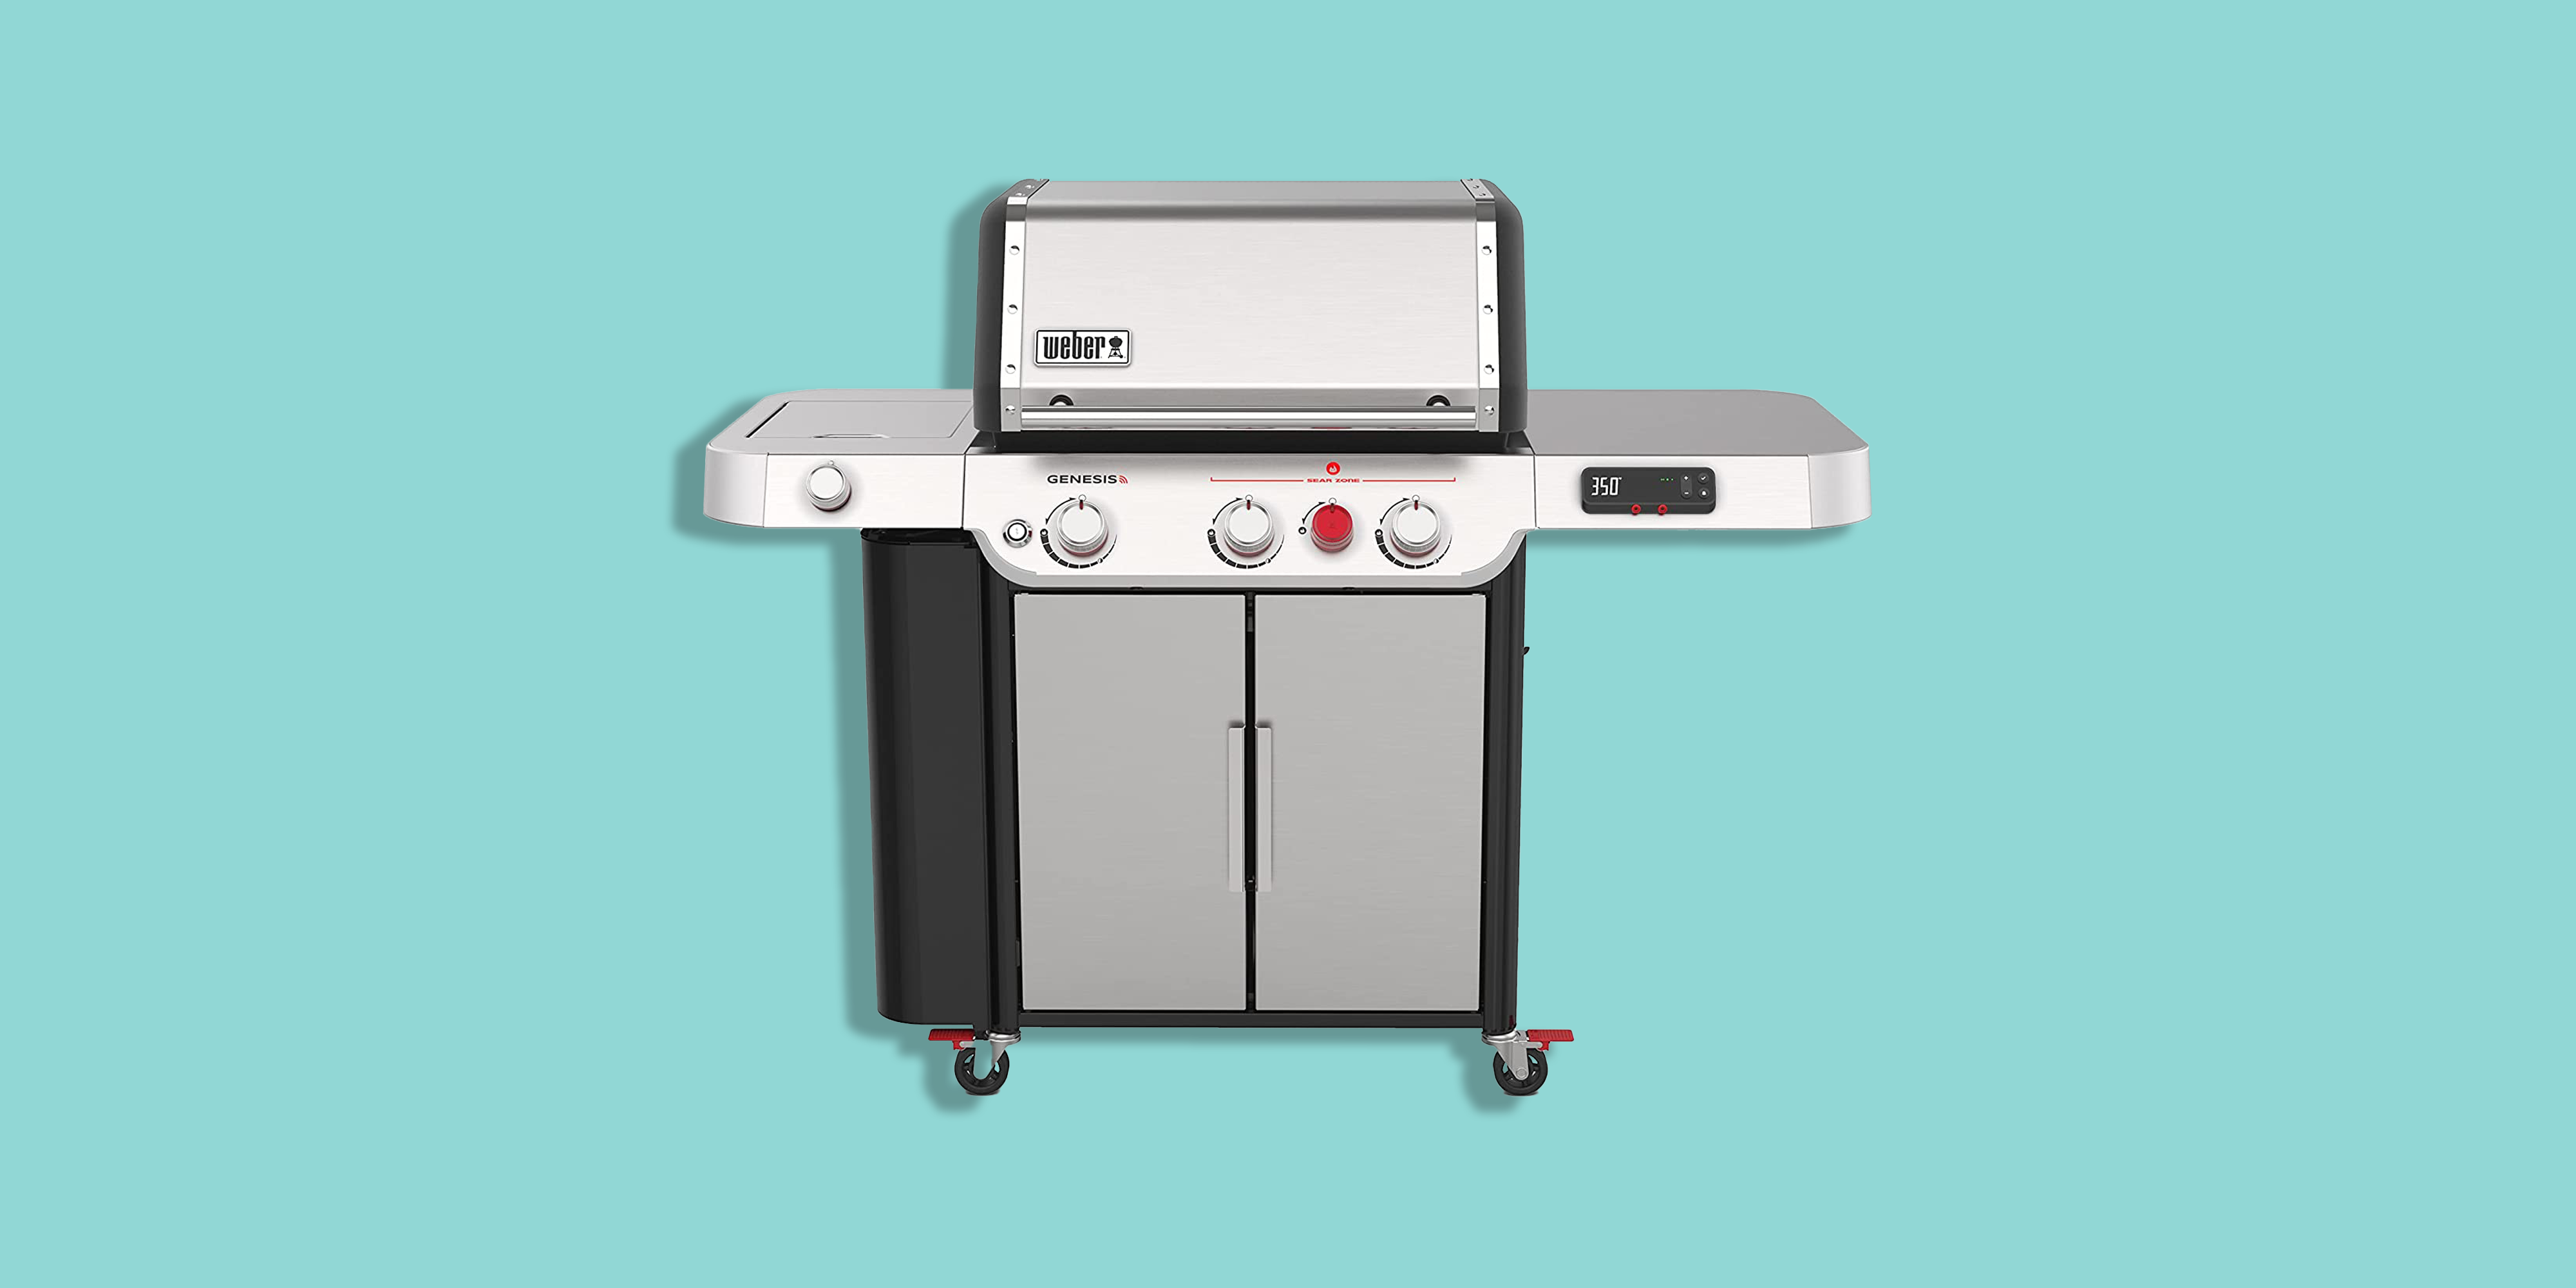 New Weber Smart Grills - What Are They And How Do They Work